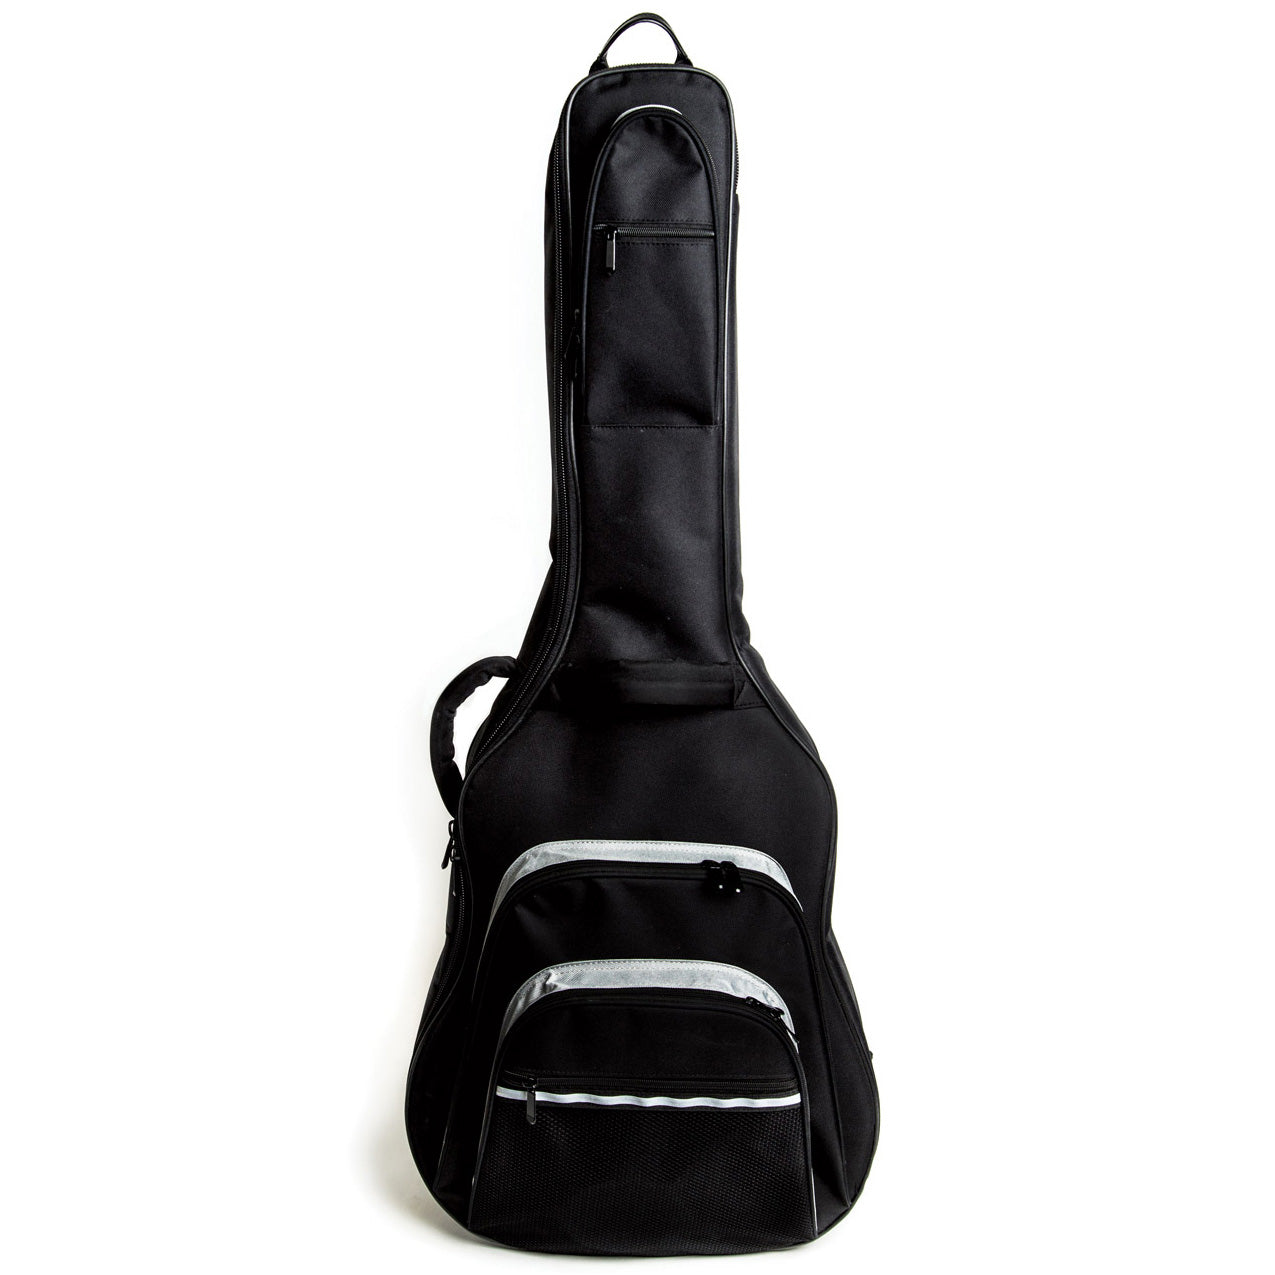 Solutions Deluxe Gig Bag Acoustic